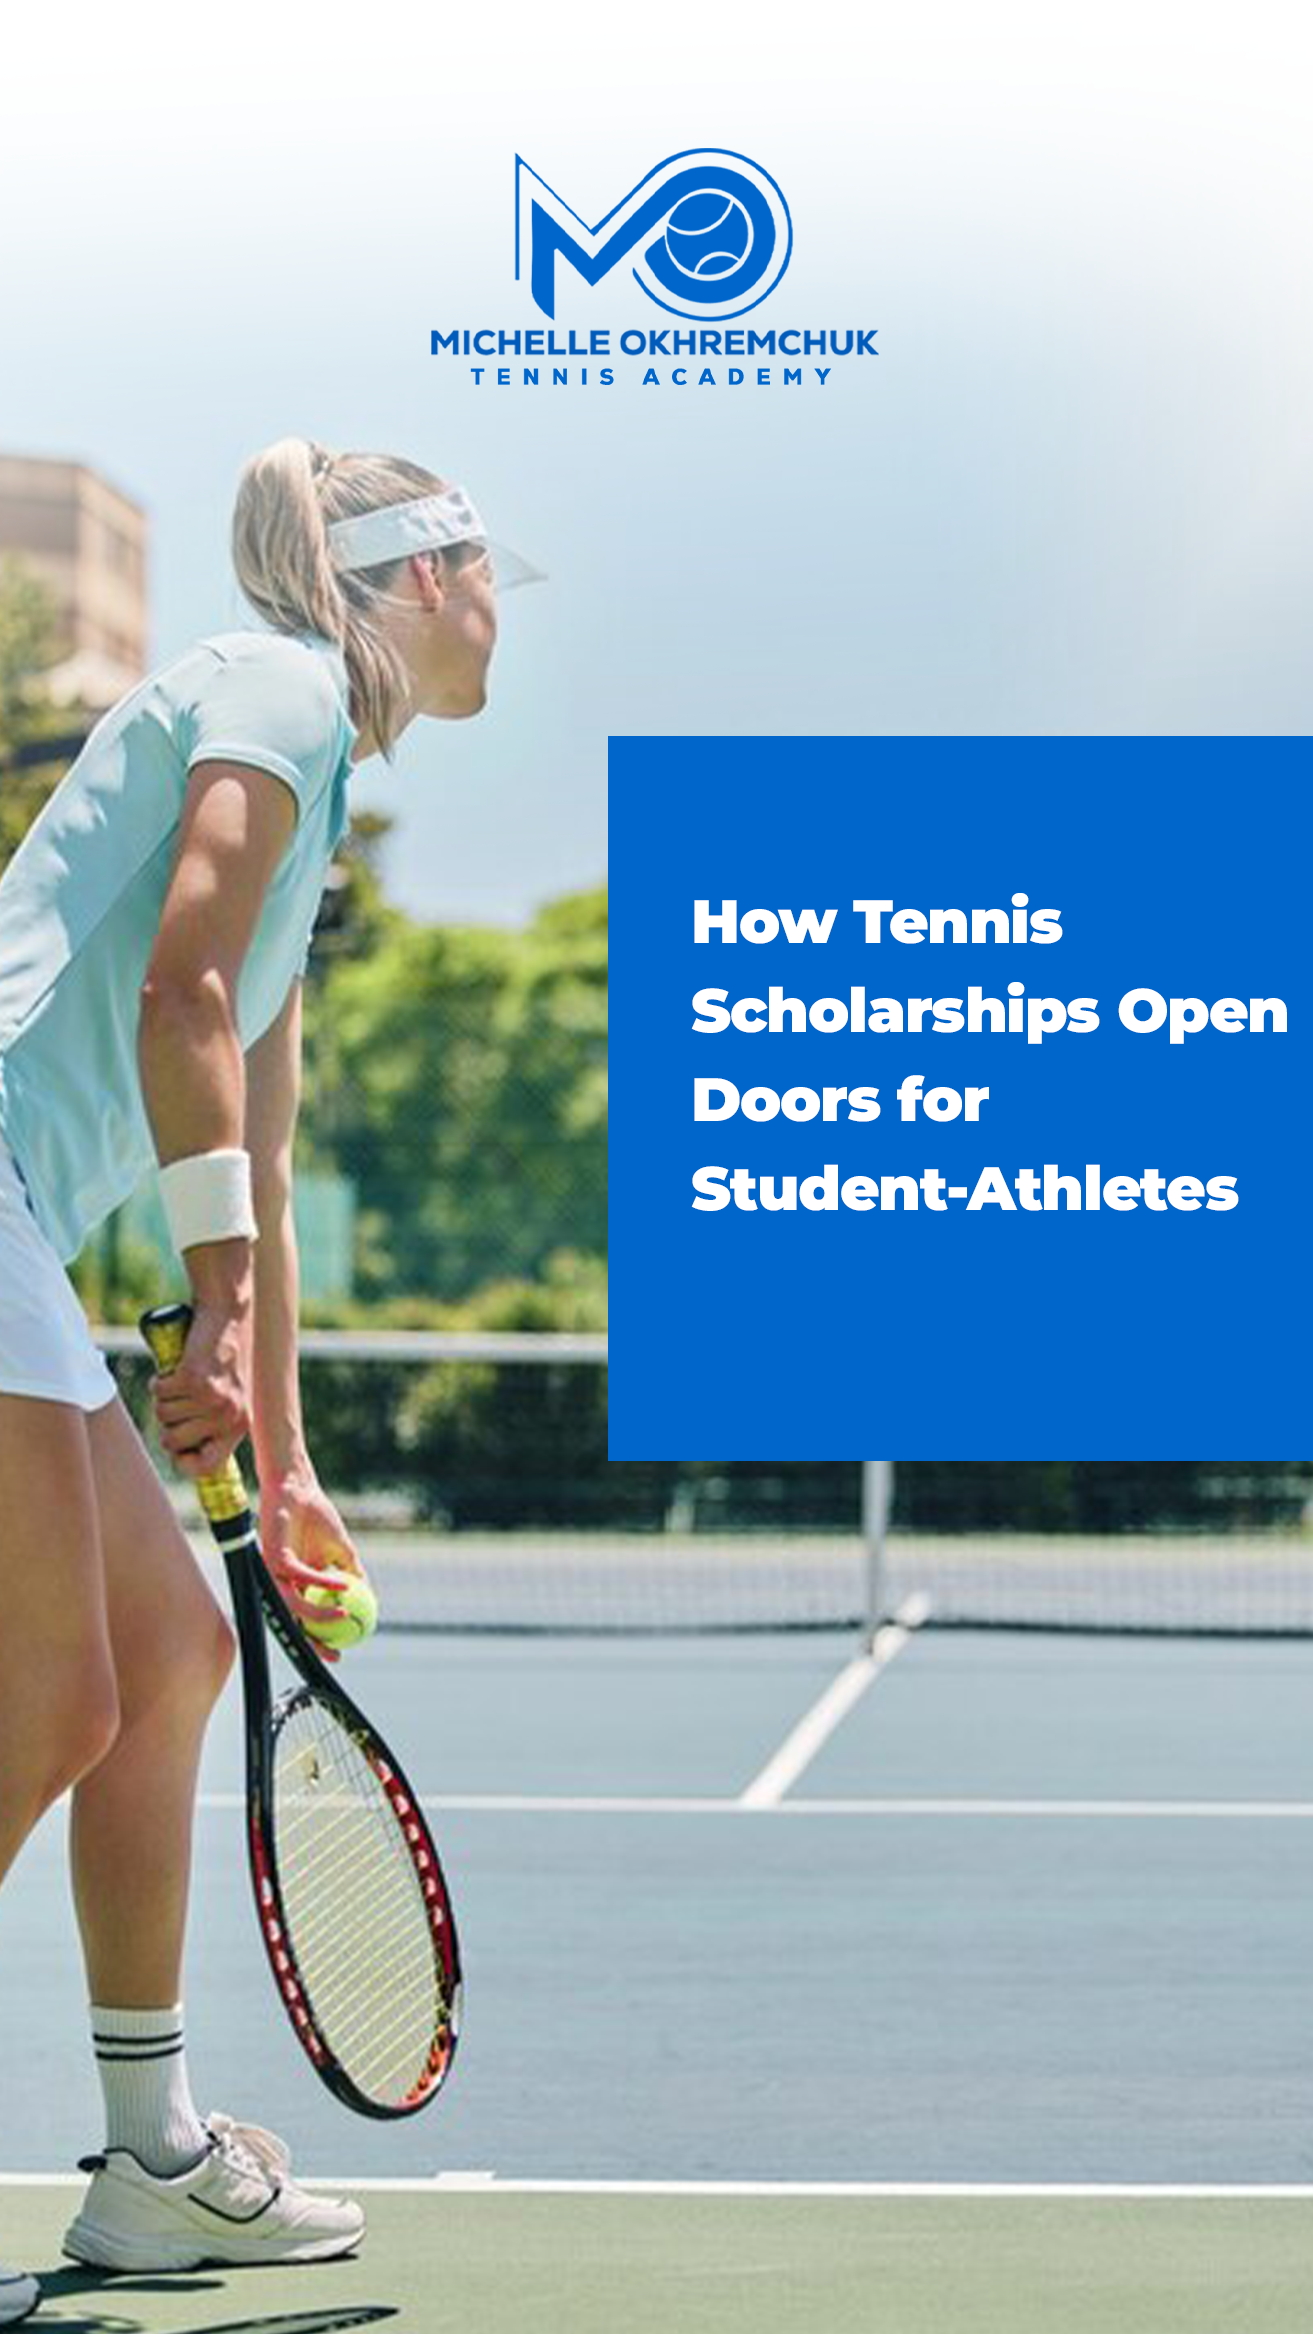 How Tennis Scholarships Open Doors for Student-Athletes - Mo Tennis Training Academy